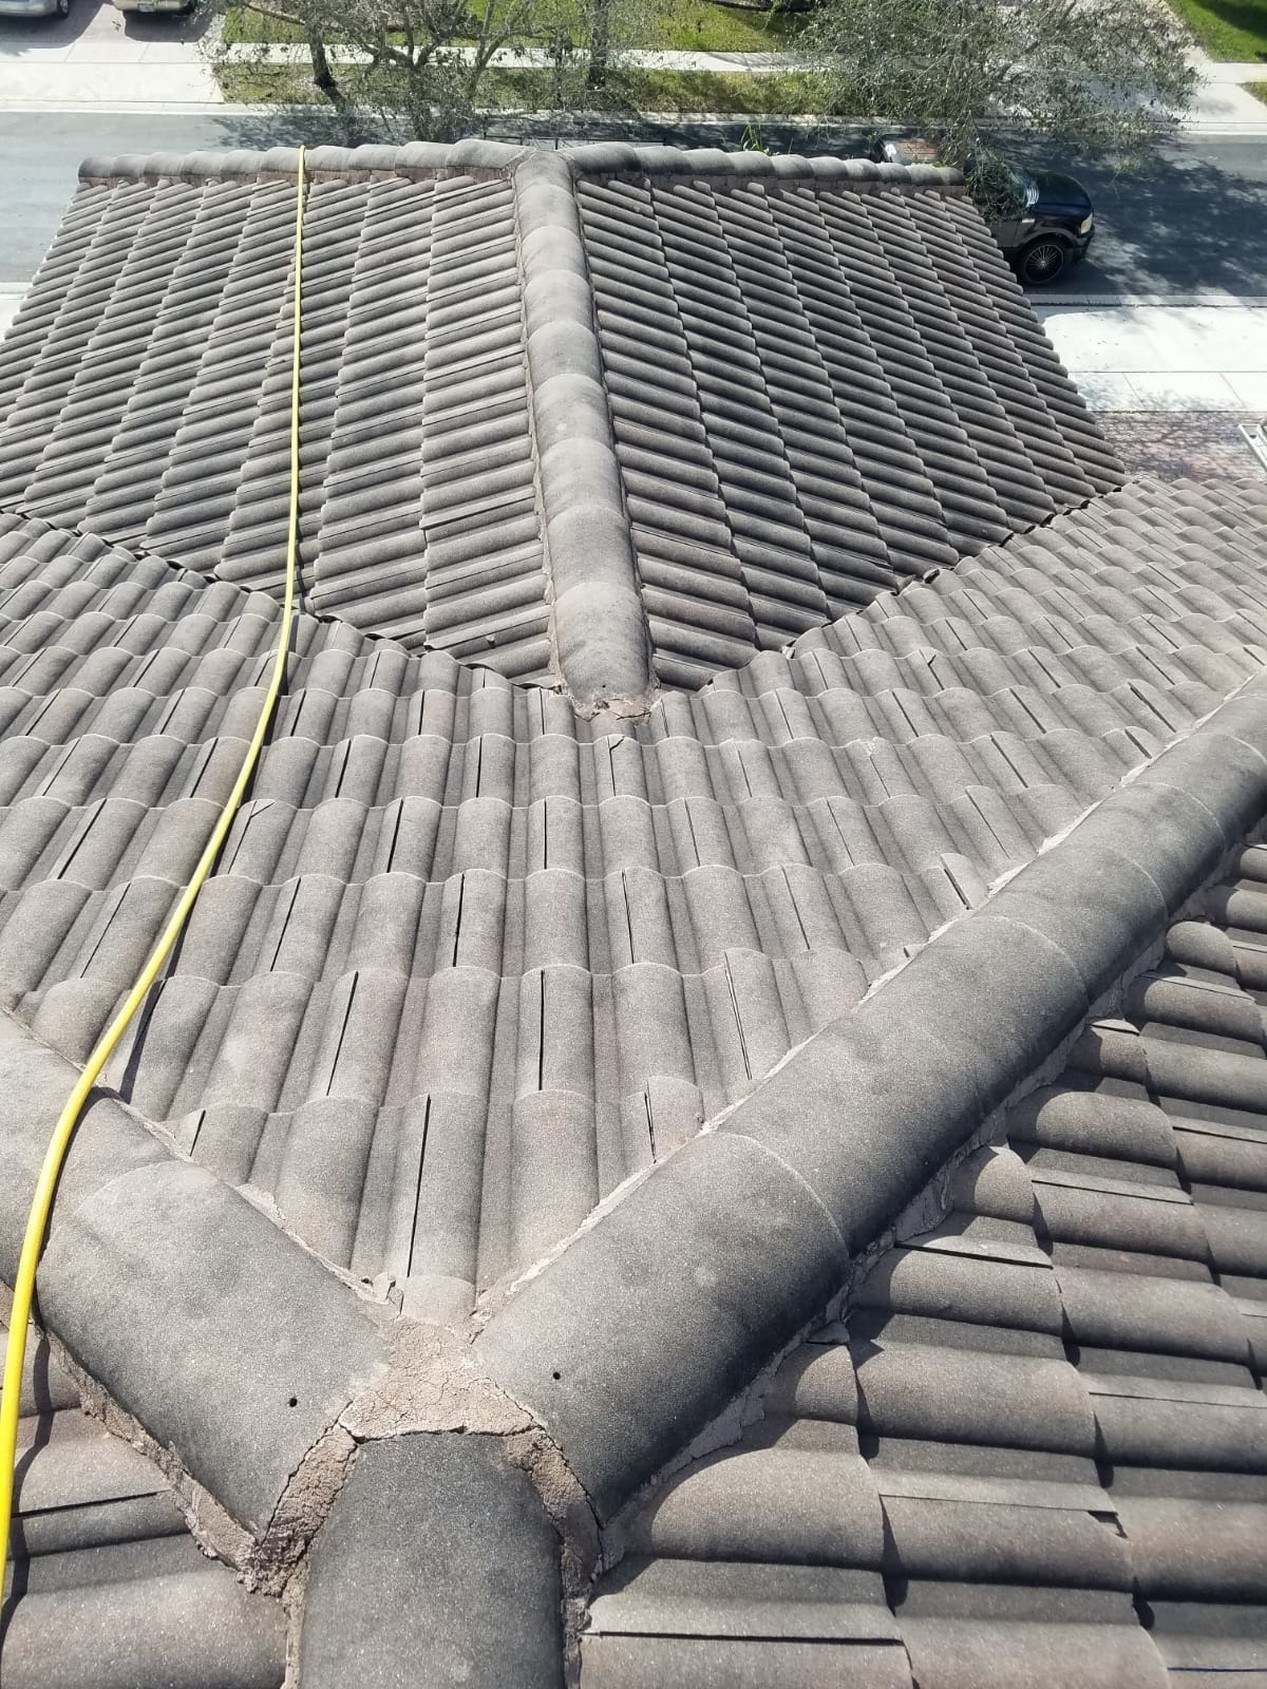 Pressure Cleaning Of Roof